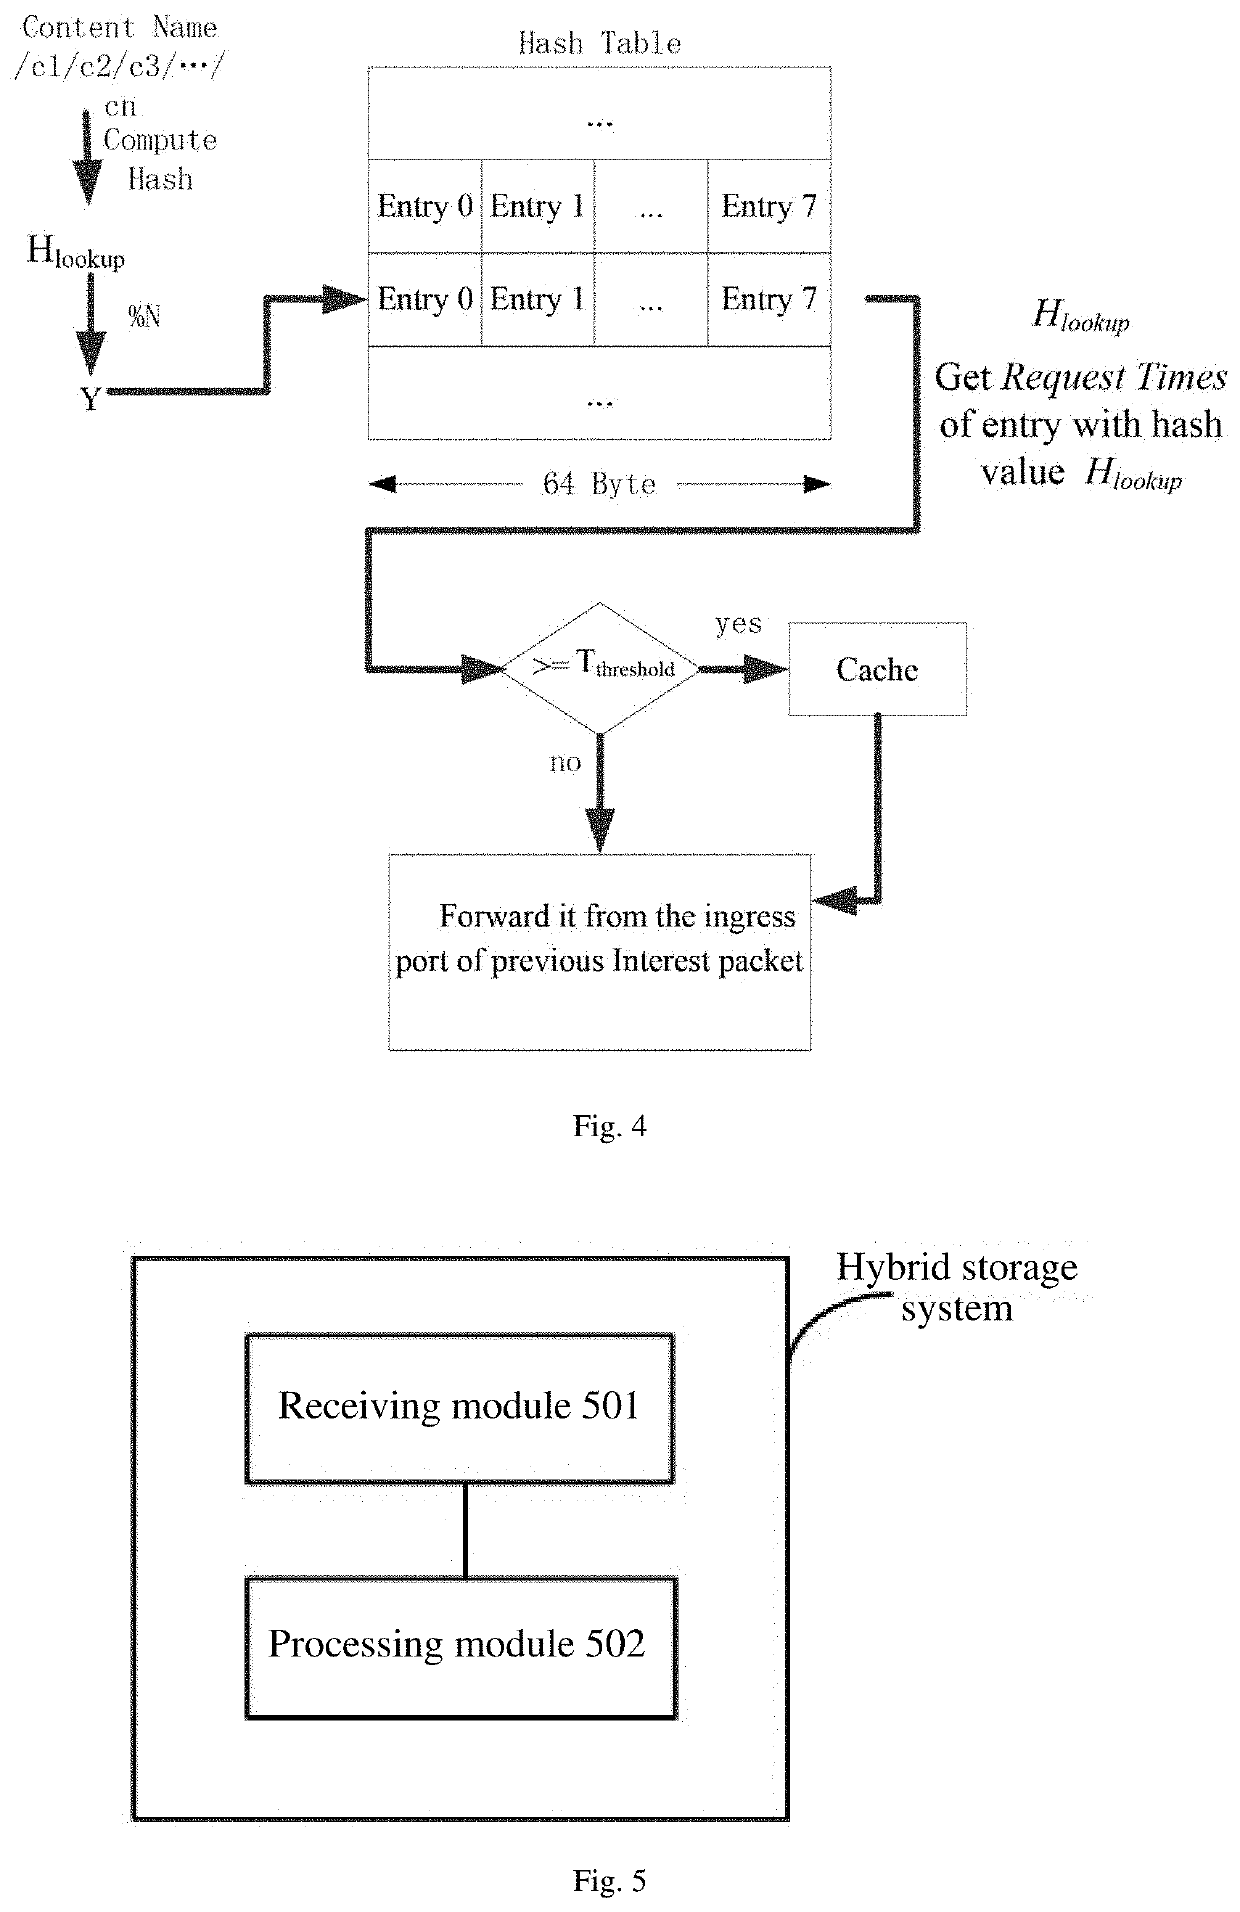 Content filtering method supporting hybrid storage system